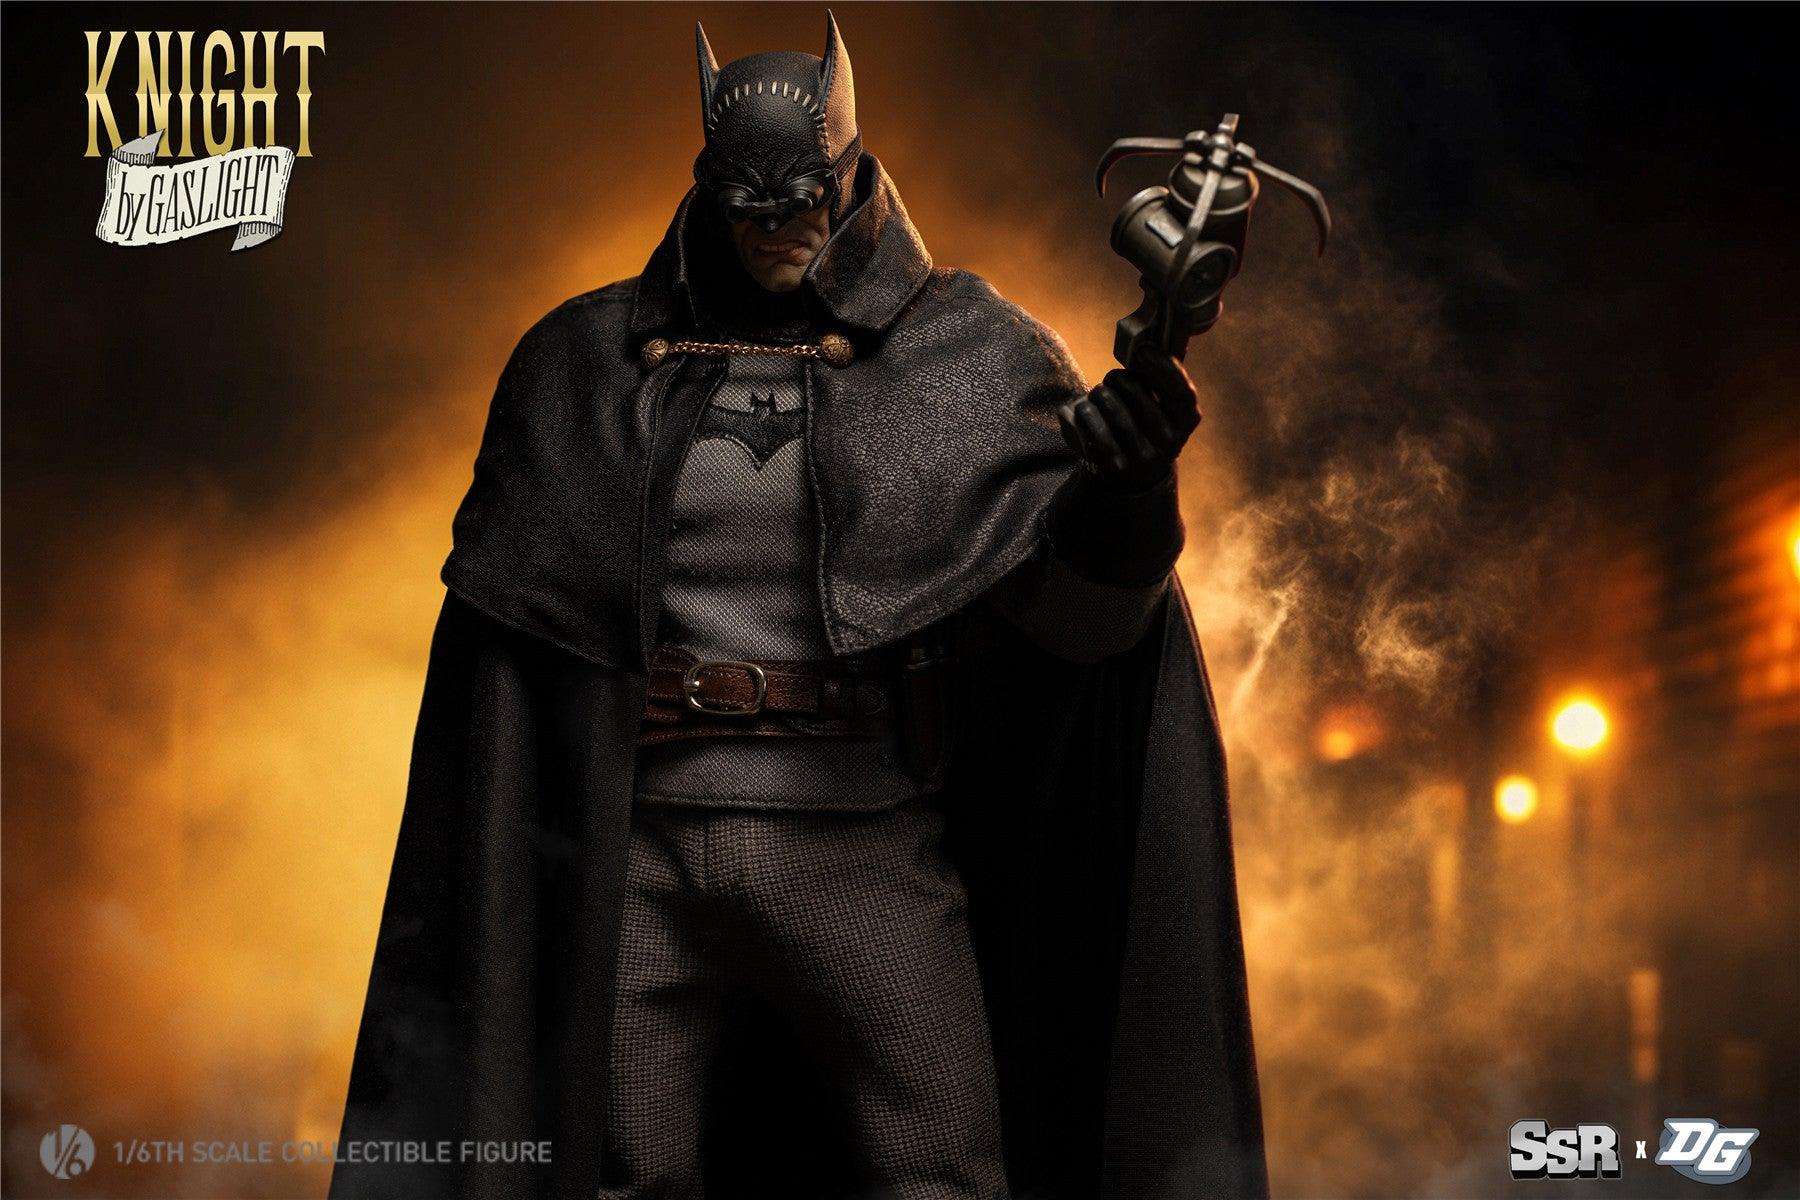 SSR Toys - 1:6 Knight by Gaslight Action Figure